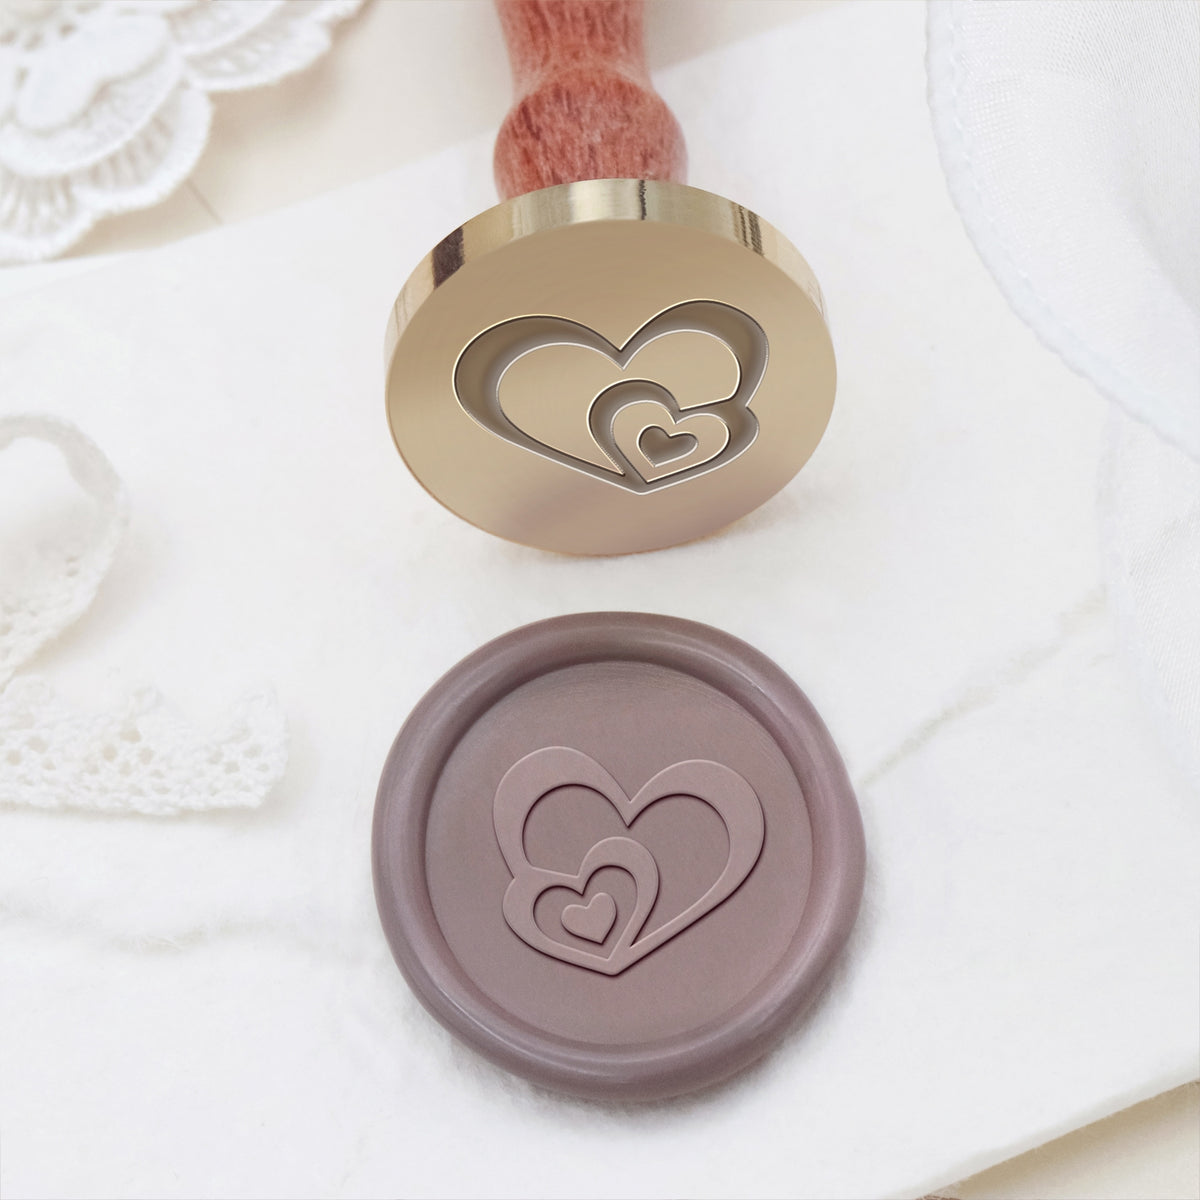 Lace Heart Wax Seal Stamp | Valentine's Day Wax Seal Stamp | Invitation  Sealing Stamp, Wax Seals, Wedding Wax Seal Stamp, Wax Seal Kit